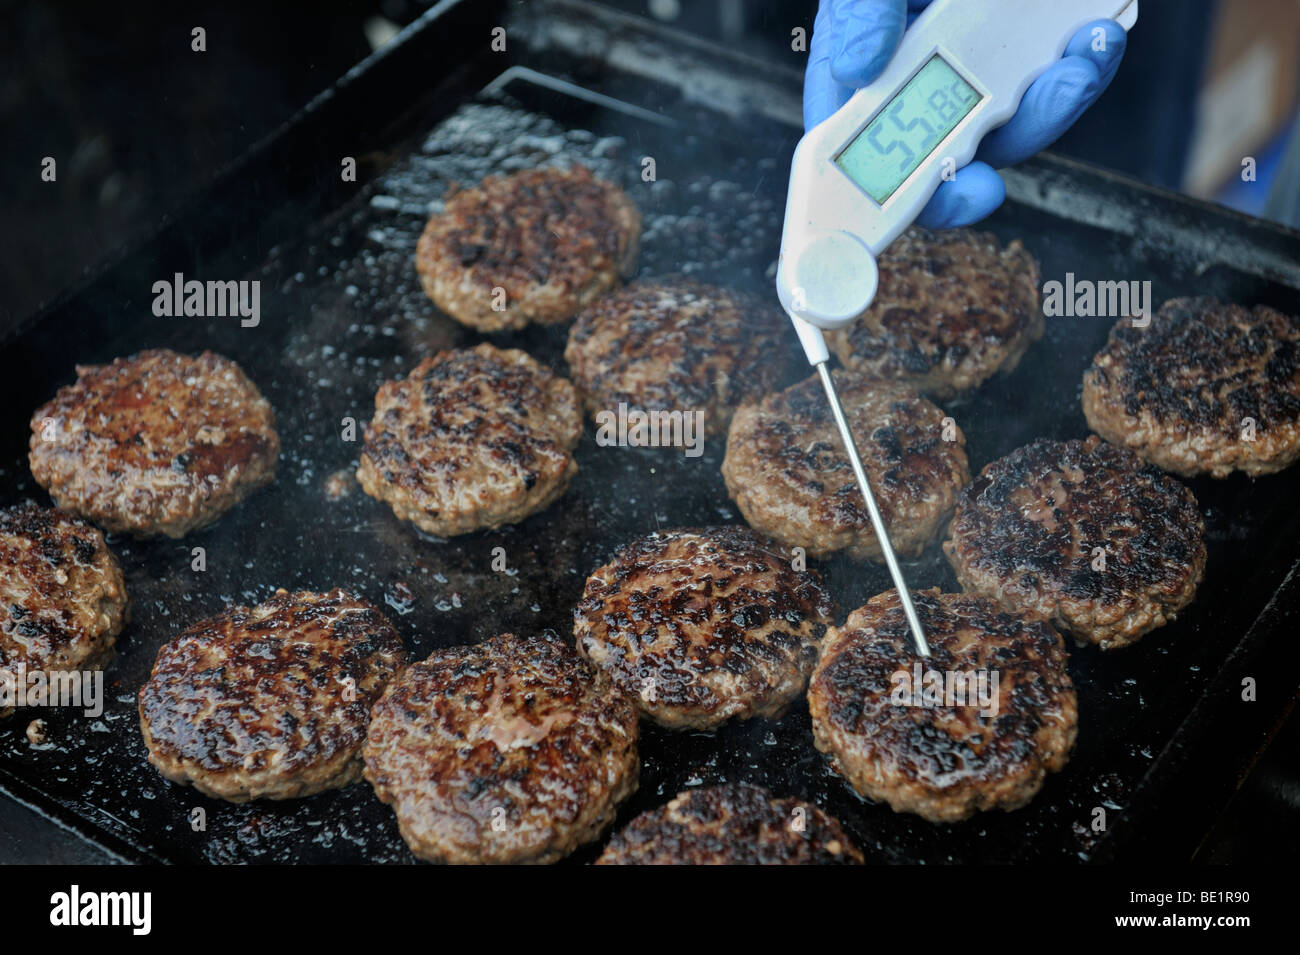 Hamburgers being cooked on hotplate and digital thermometer checking internal temperature Stock Photo